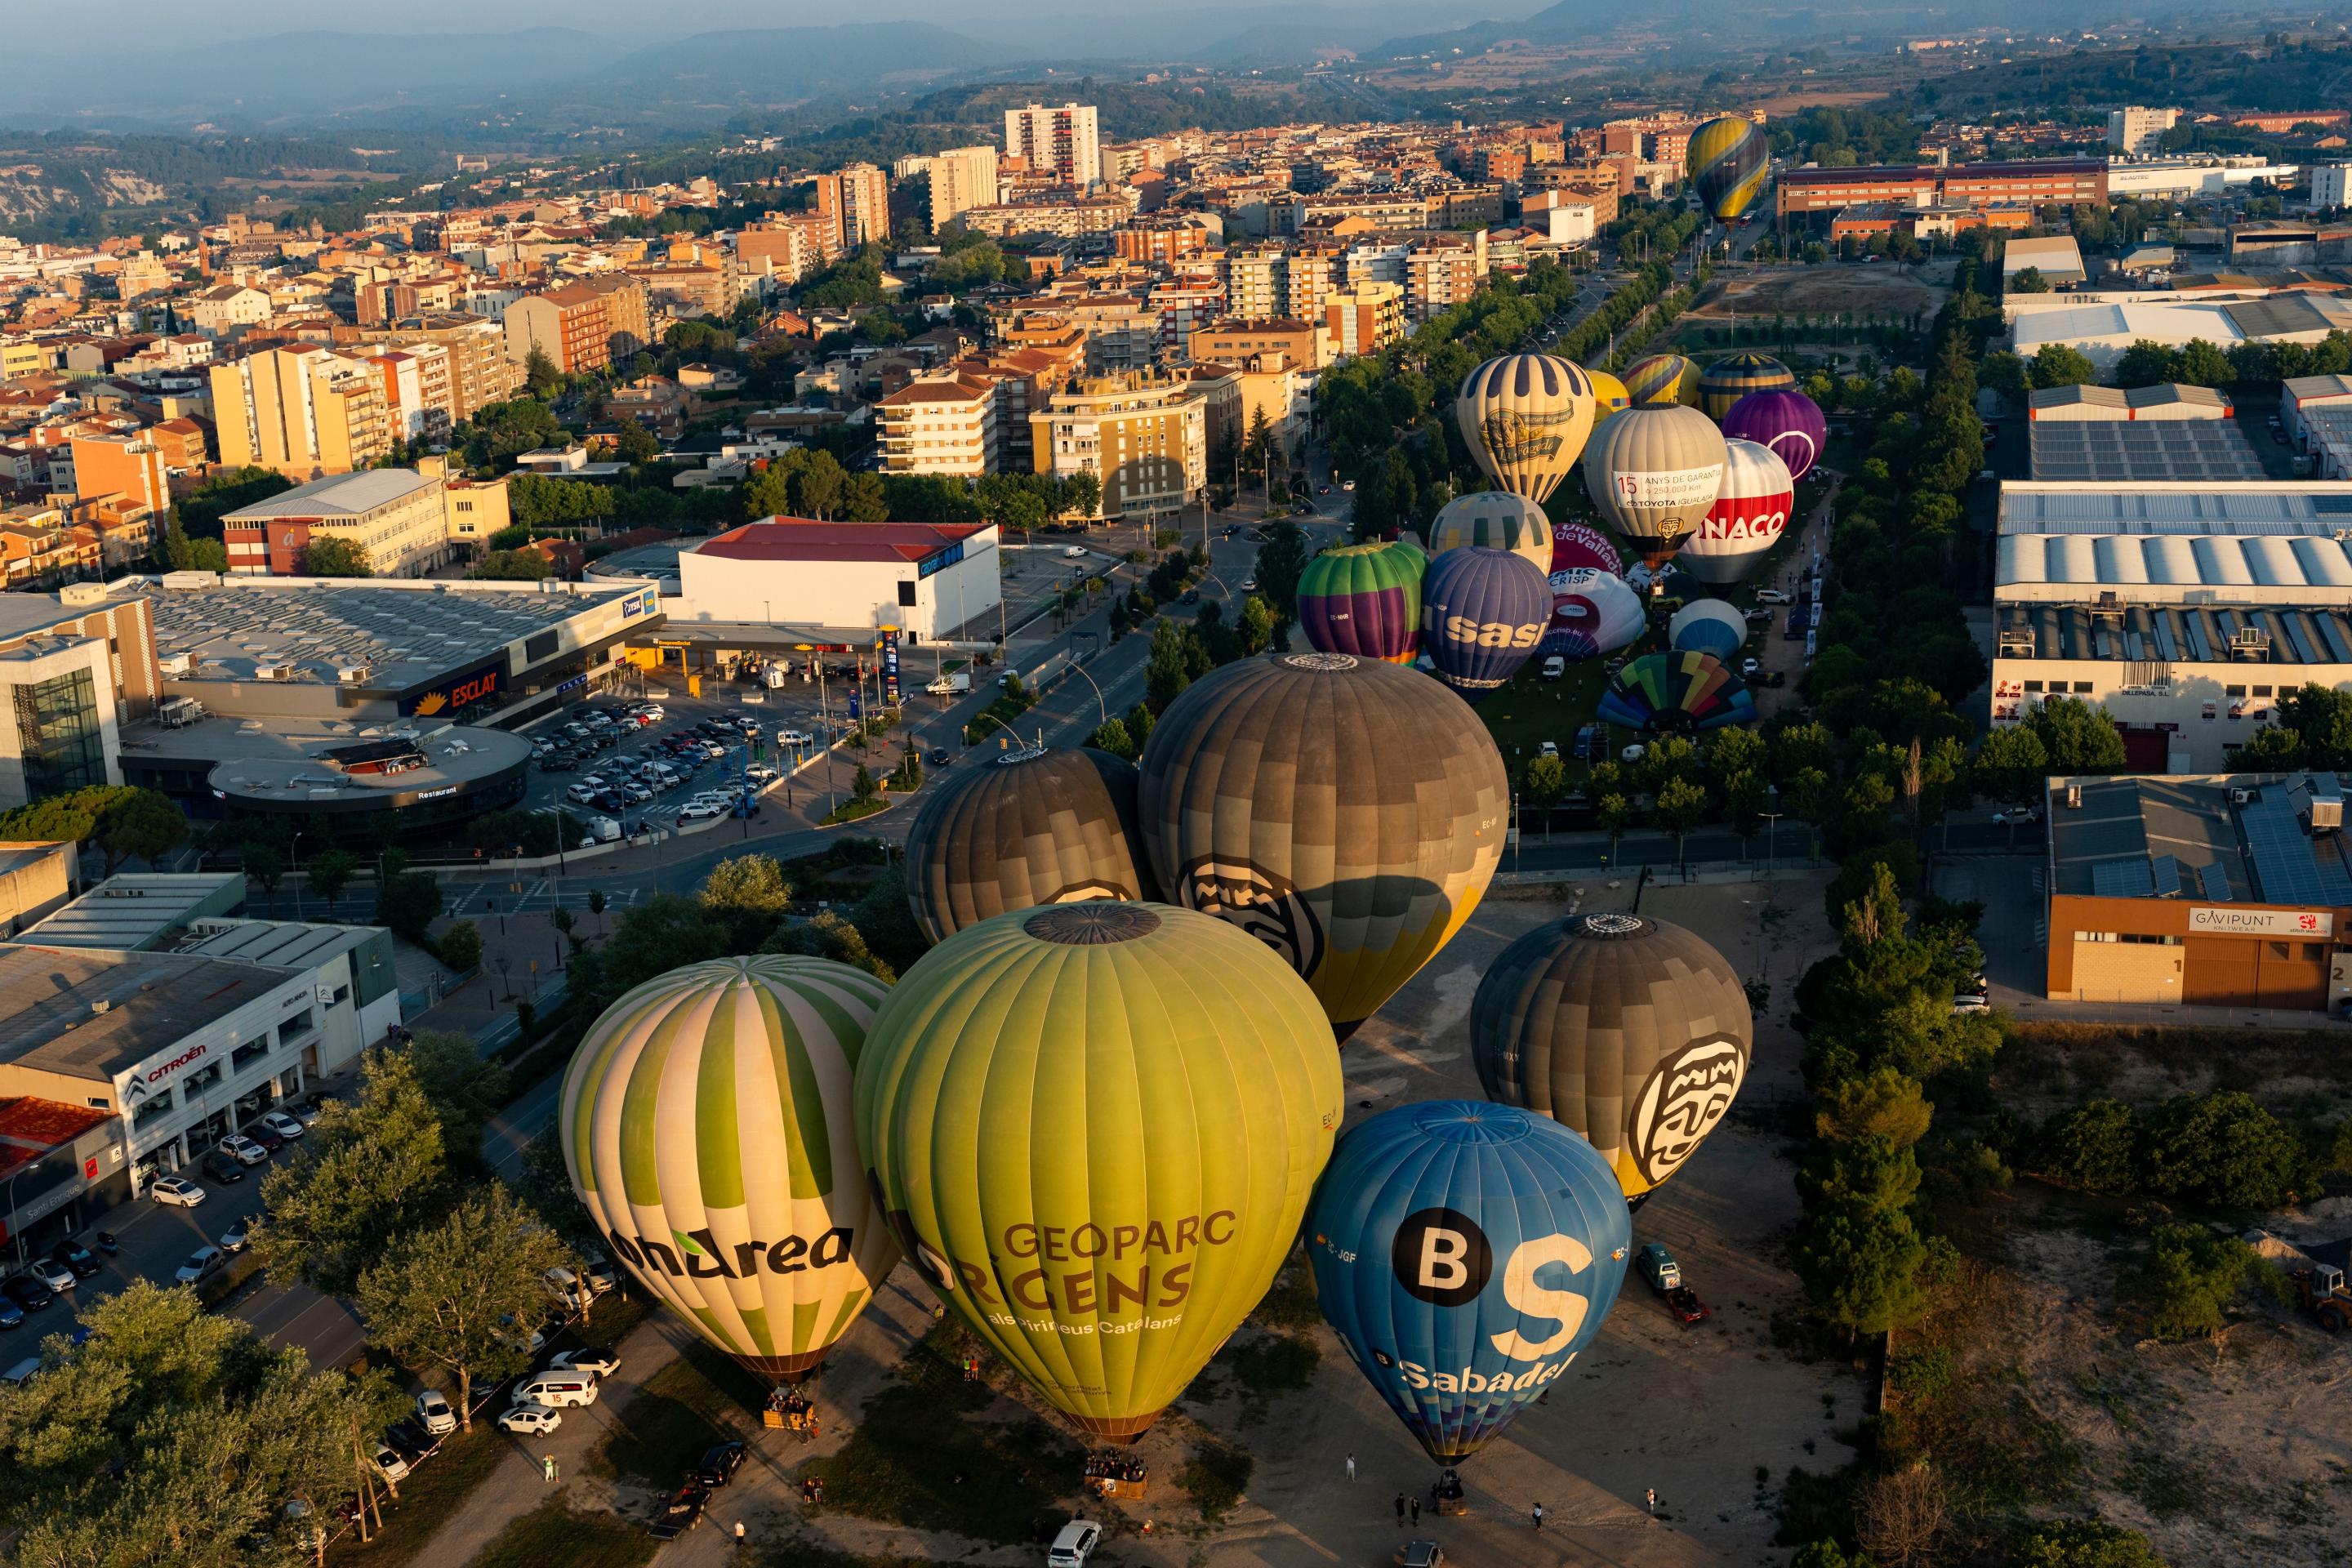 Several balloons are about to participate in the inaugural flight of the 28th European Balloon Festival in Igualada, Spain, on July 11.